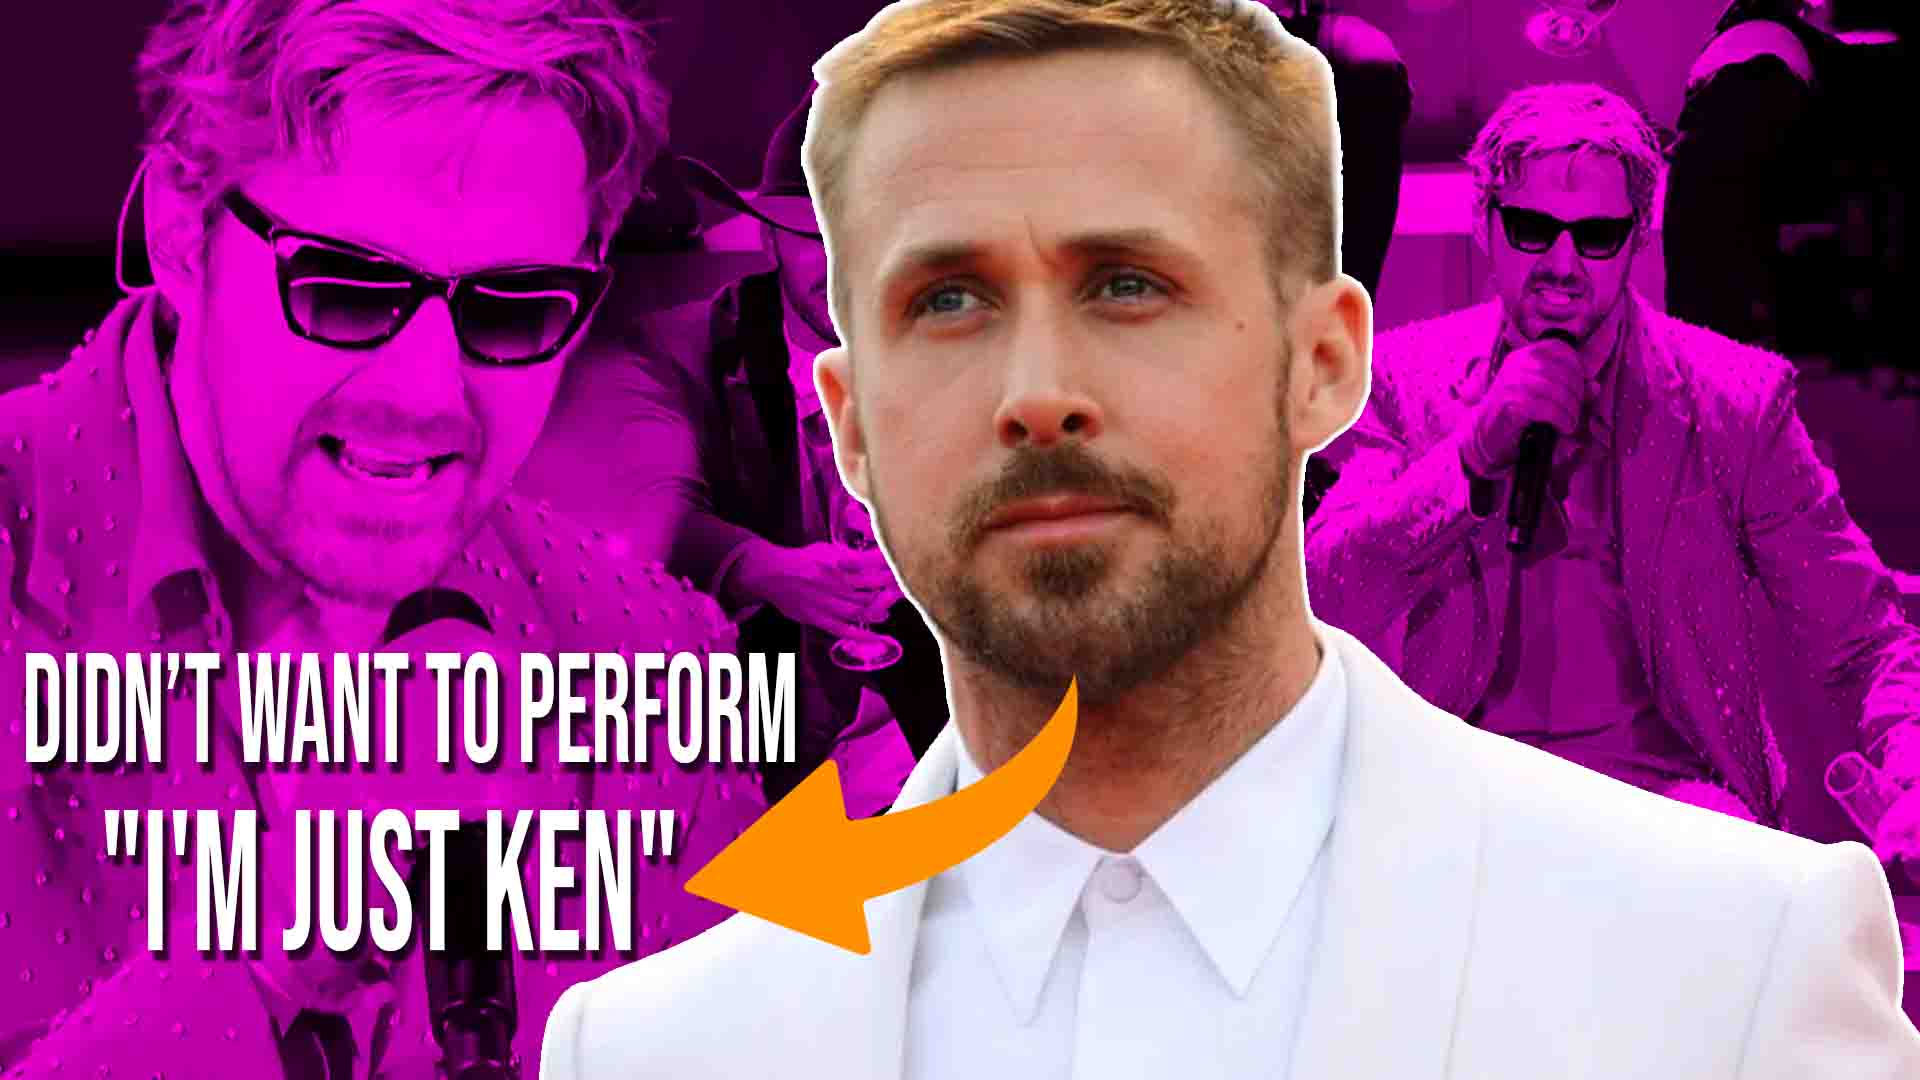 Ryan Gosling Did Not Want to Perform “I’m Just Ken” at Oscars